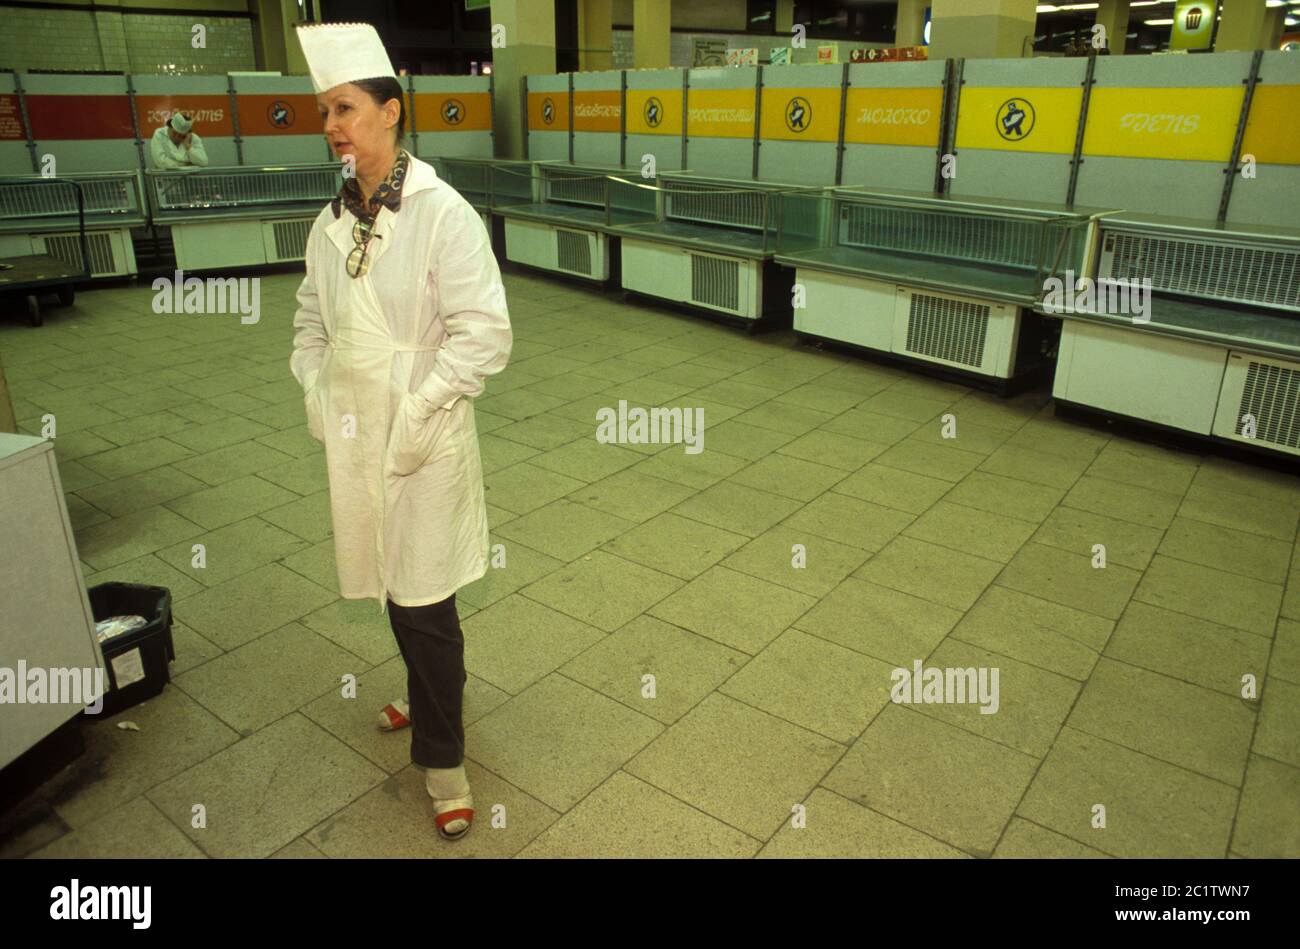 Riga Lativa 1989, food is  scarce in the Central Department Store. There is nothing to sell. A Baltic State country was formally part of the Soviet Union - USSR. 1980s HOMER SYKES Stock Photo